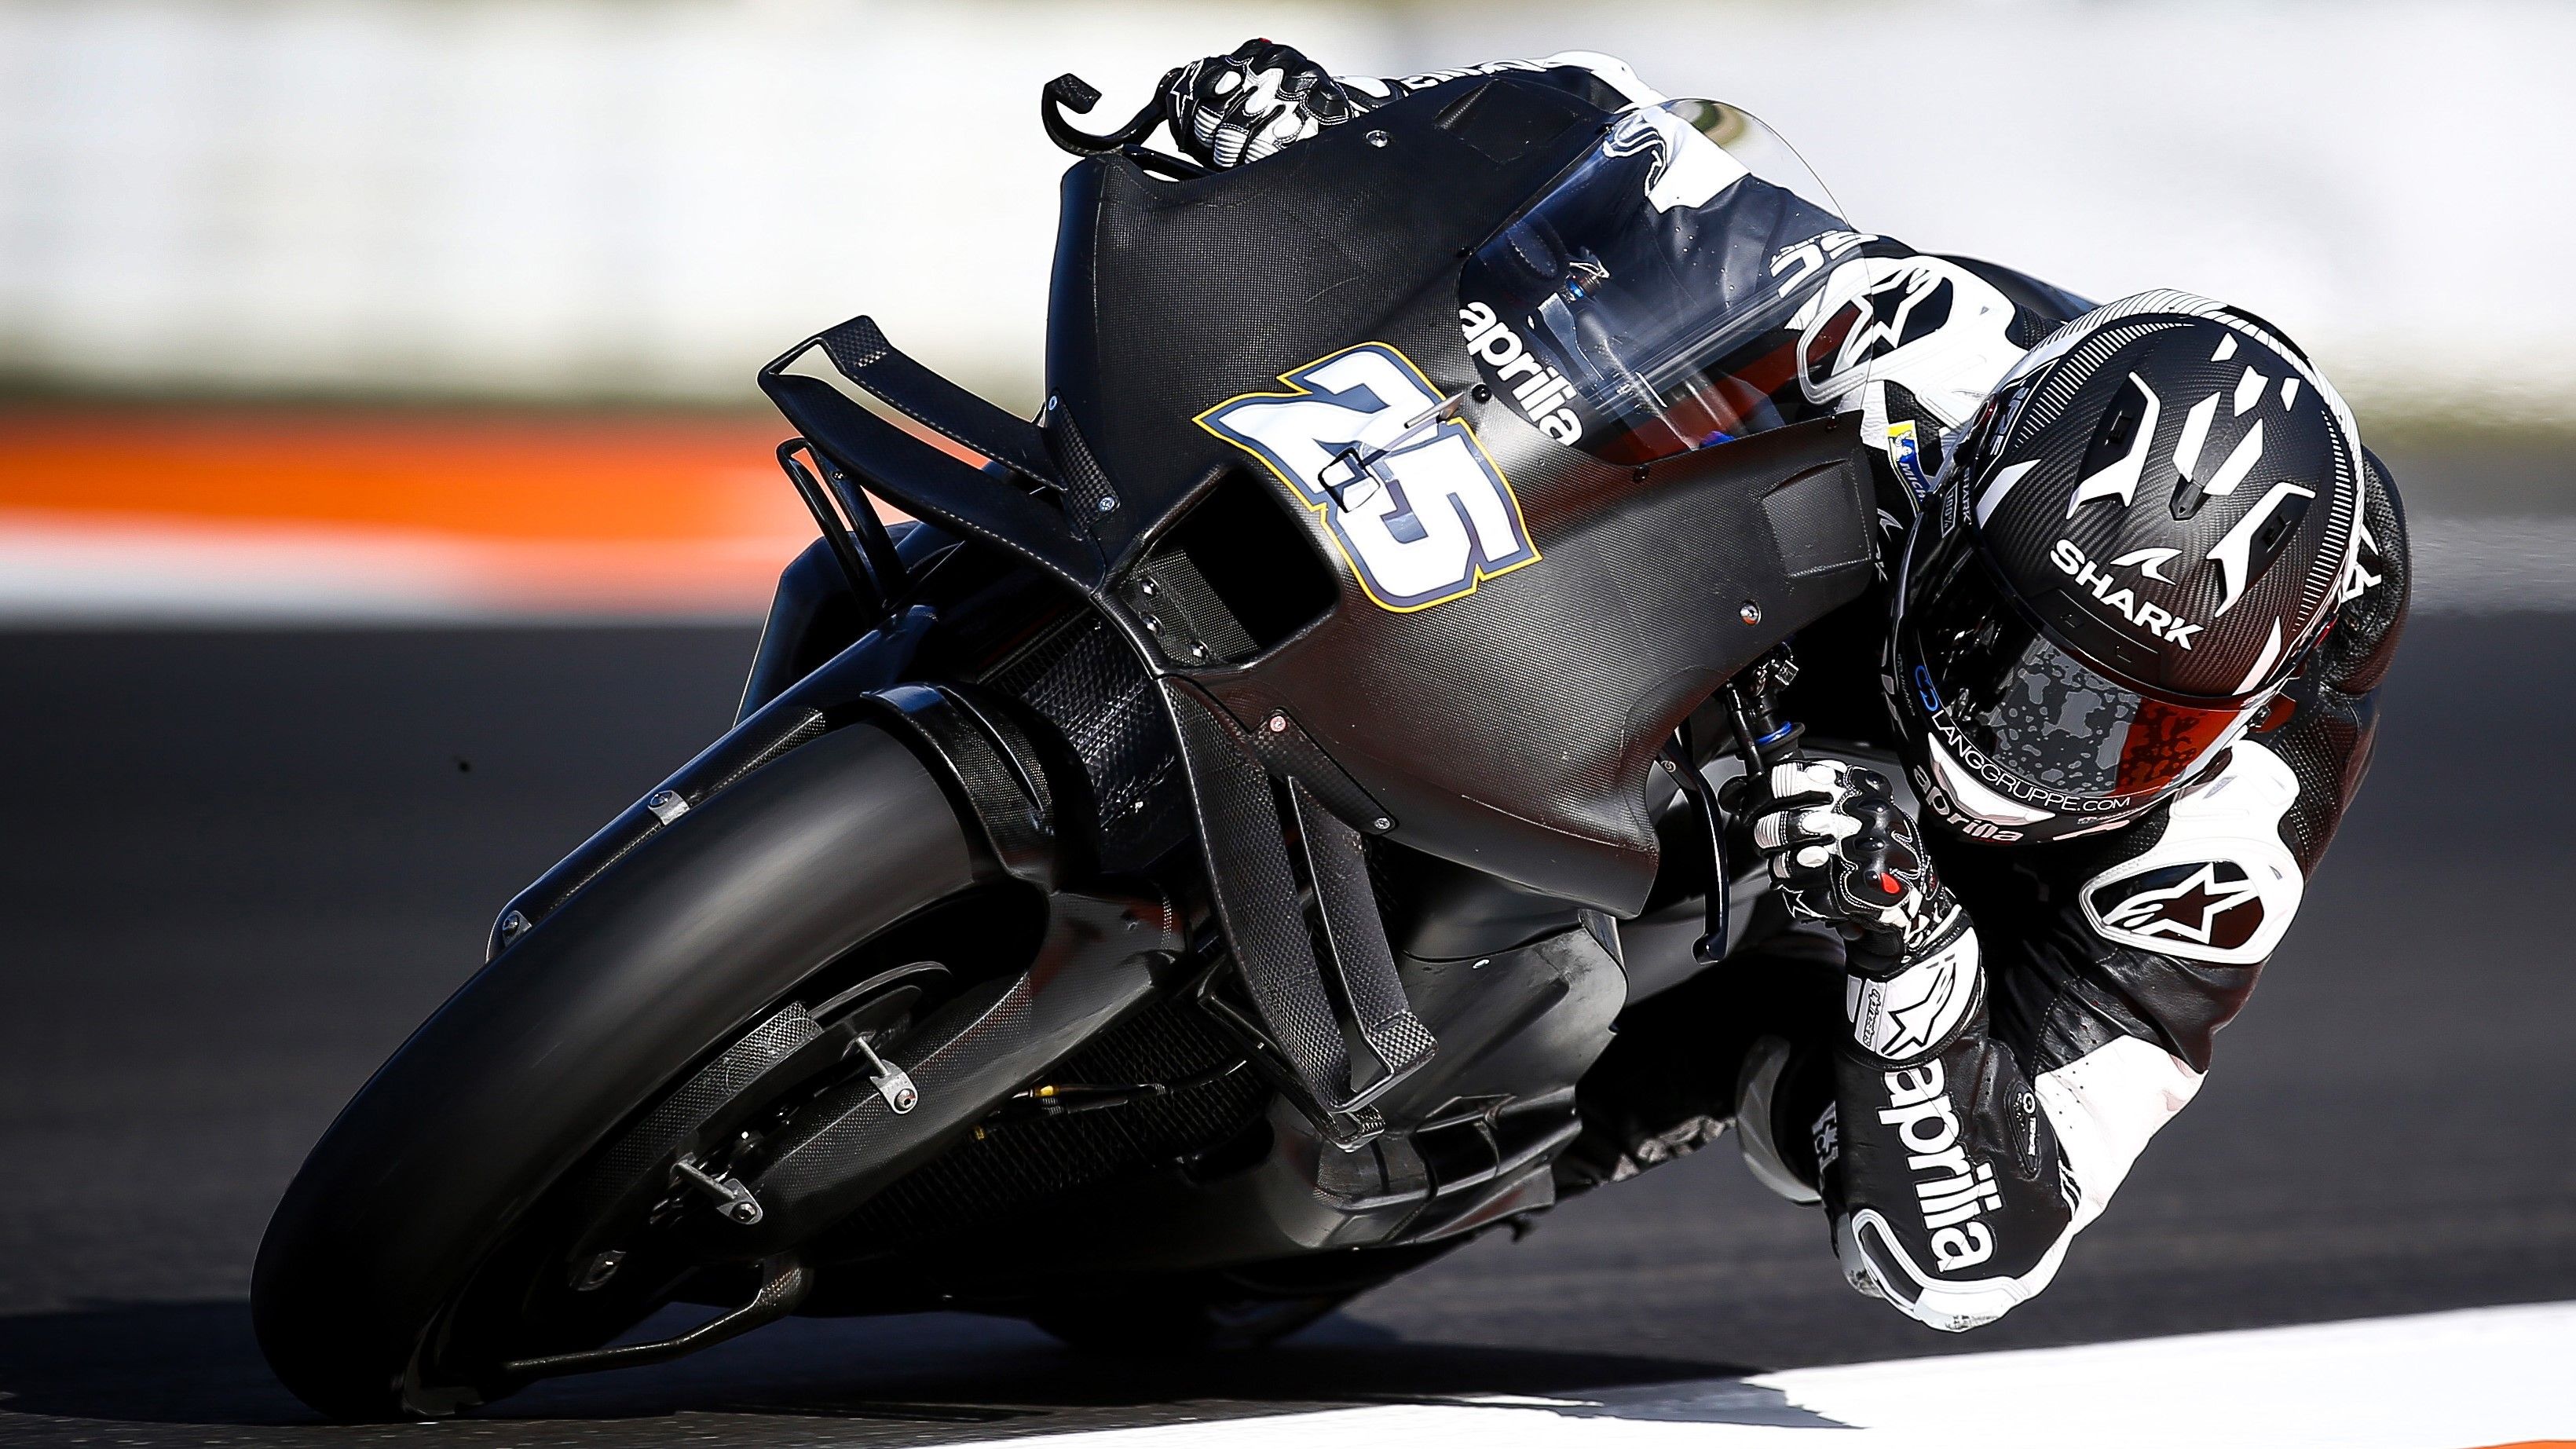 Raul Fernandez of Spain and RNF Racing in action on track during the MotoGP Test in Valencia at Ricardo Tormo Circuit.